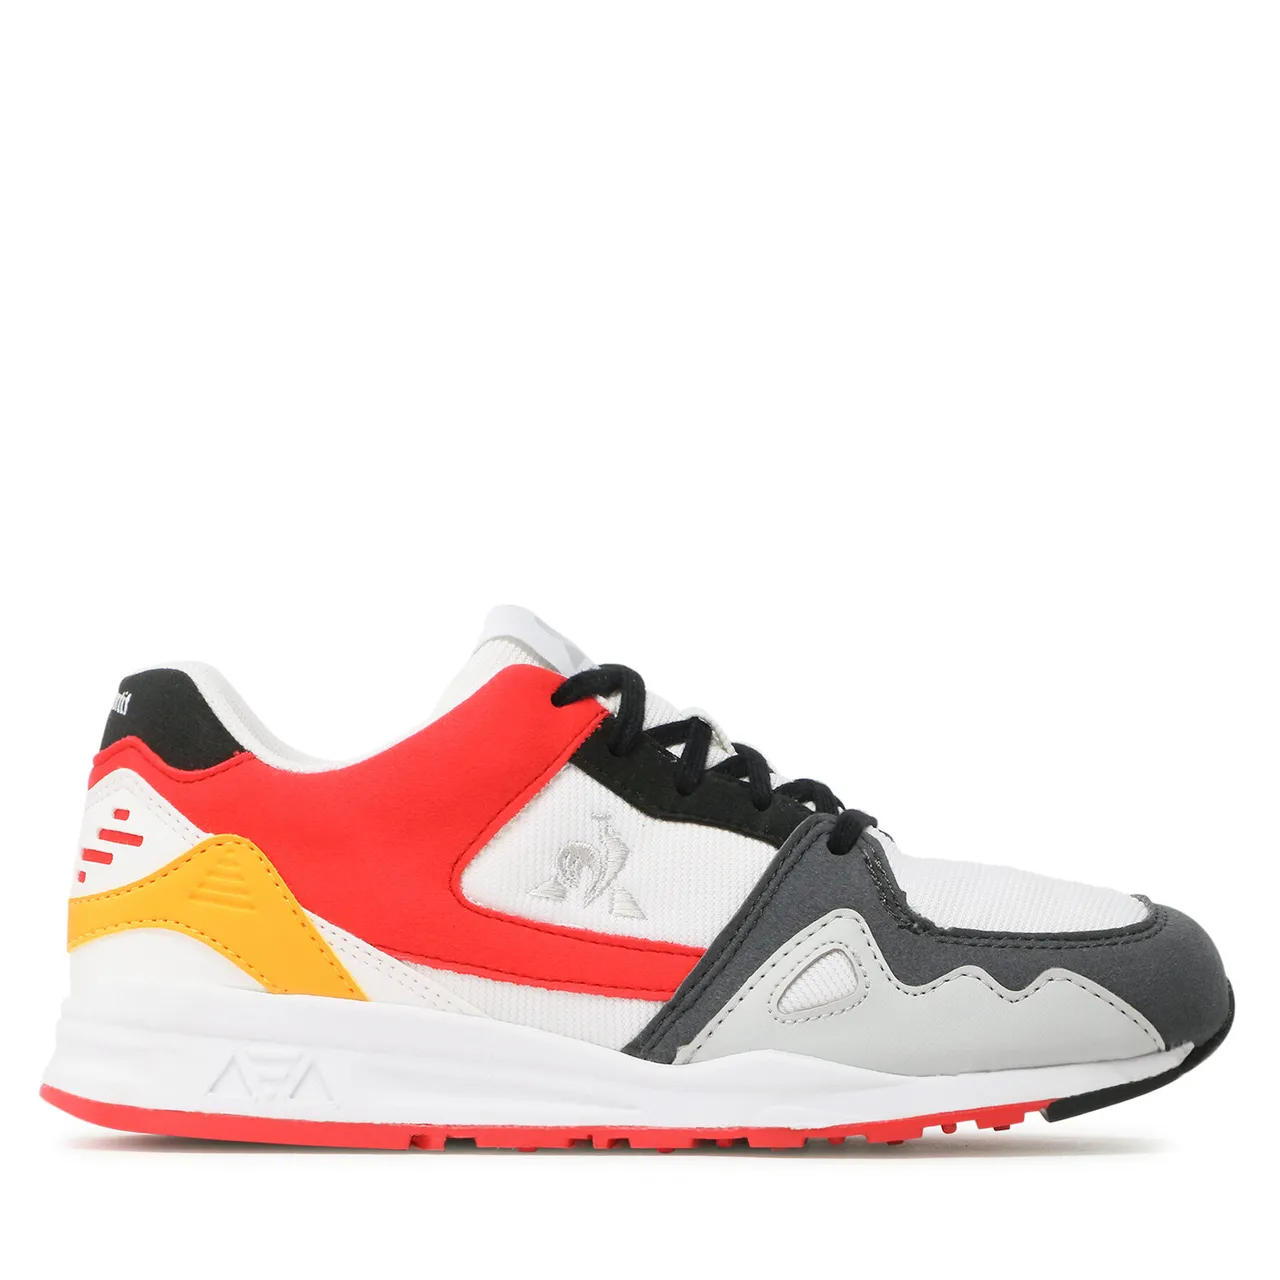 Sneakers Le Coq Sportif Lcs R1000 Gs 2210349 Optical White/Fiery Red